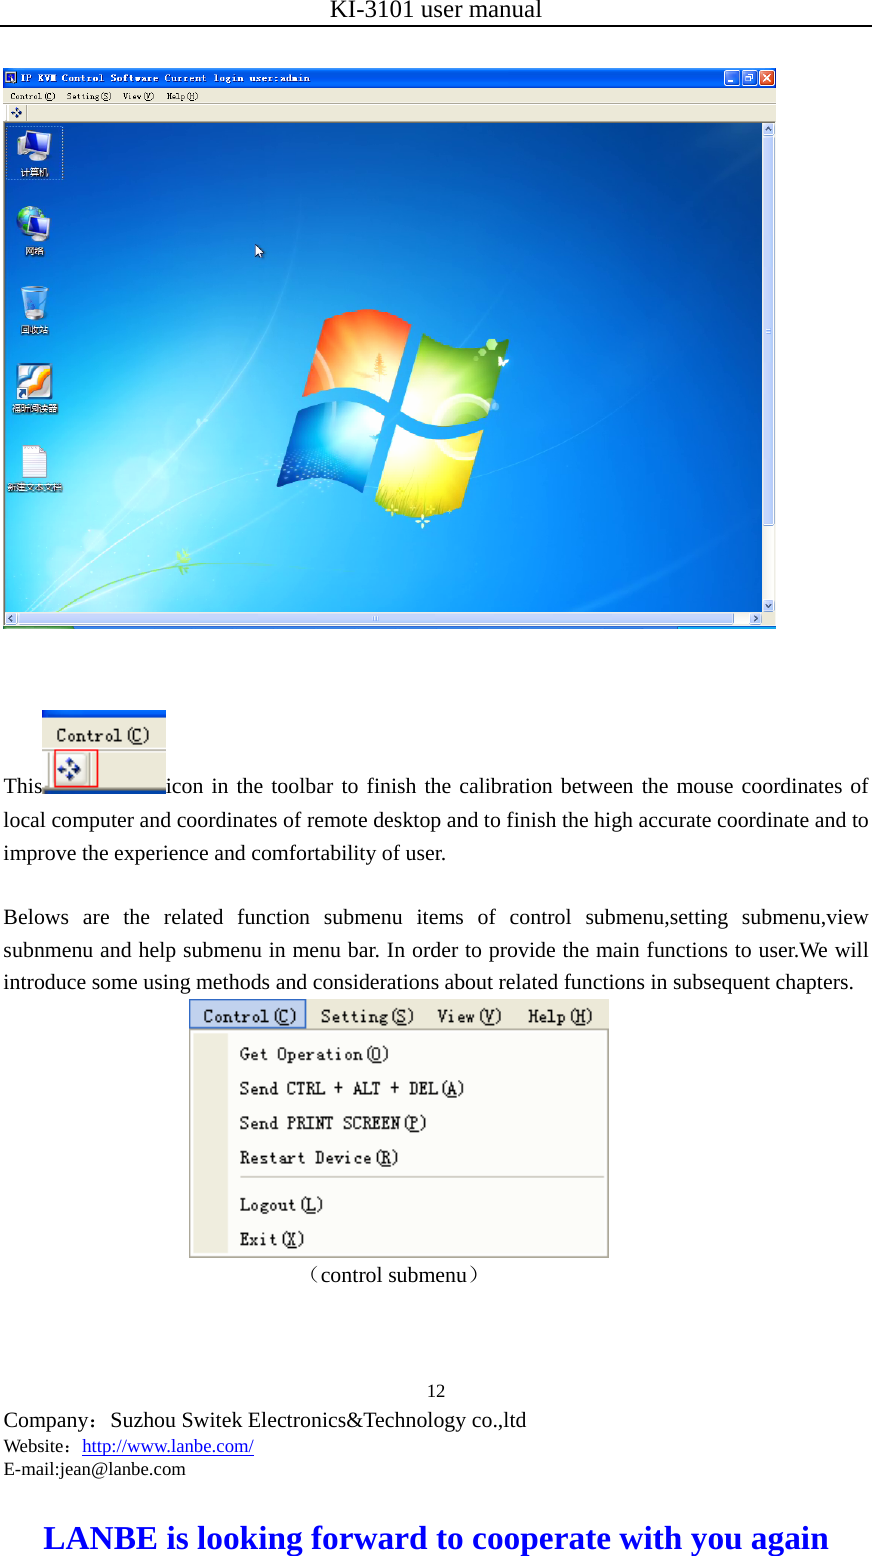 KI-3101 user manual  Company：Suzhou Switek Electronics&amp;Technology co.,ltd Website：http://www.lanbe.com/ E-mail:jean@lanbe.com   LANBE is looking forward to cooperate with you again 12          This icon in the toolbar to finish the calibration between the mouse coordinates of local computer and coordinates of remote desktop and to finish the high accurate coordinate and to improve the experience and comfortability of user.  Belows are the related function submenu items of control submenu,setting submenu,view subnmenu and help submenu in menu bar. In order to provide the main functions to user.We will introduce some using methods and considerations about related functions in subsequent chapters.                         （control submenu） 